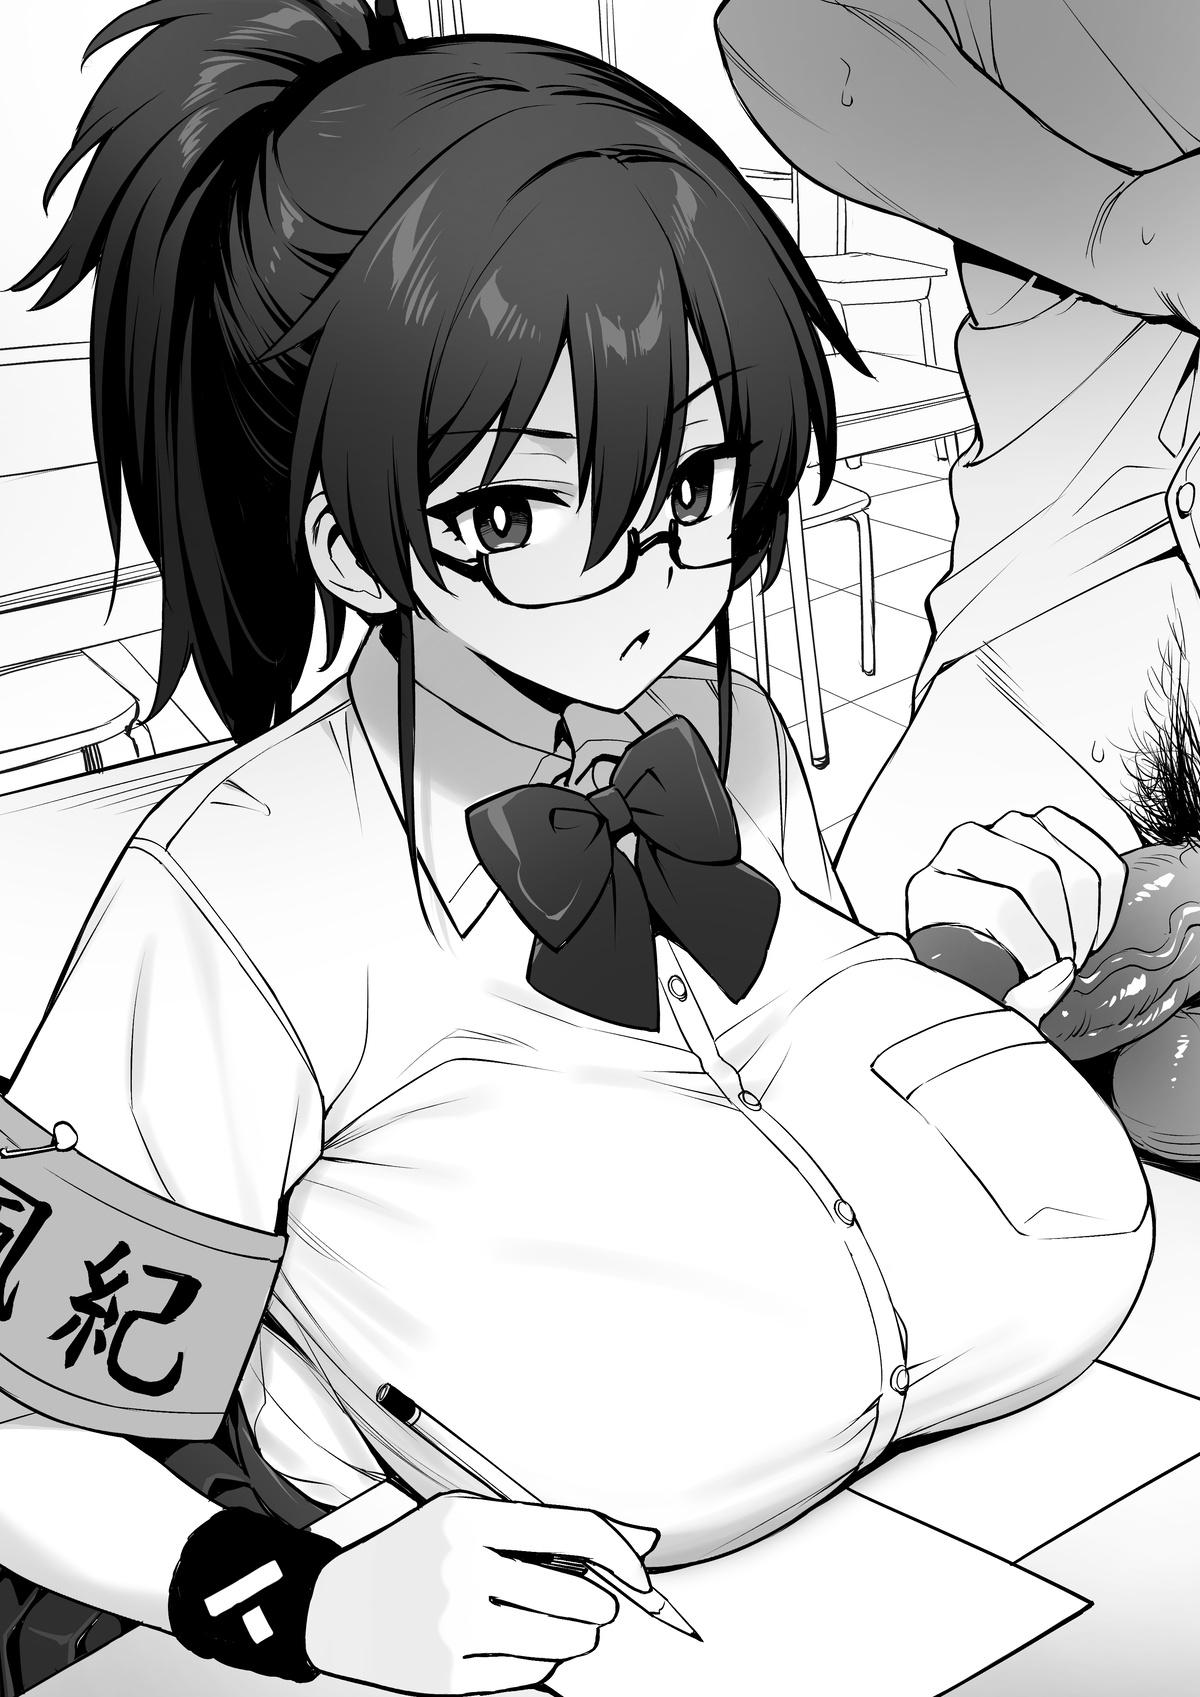 Rumor Has It That The New Chairman of Disciplinary Committee Has Huge Breasts. 25